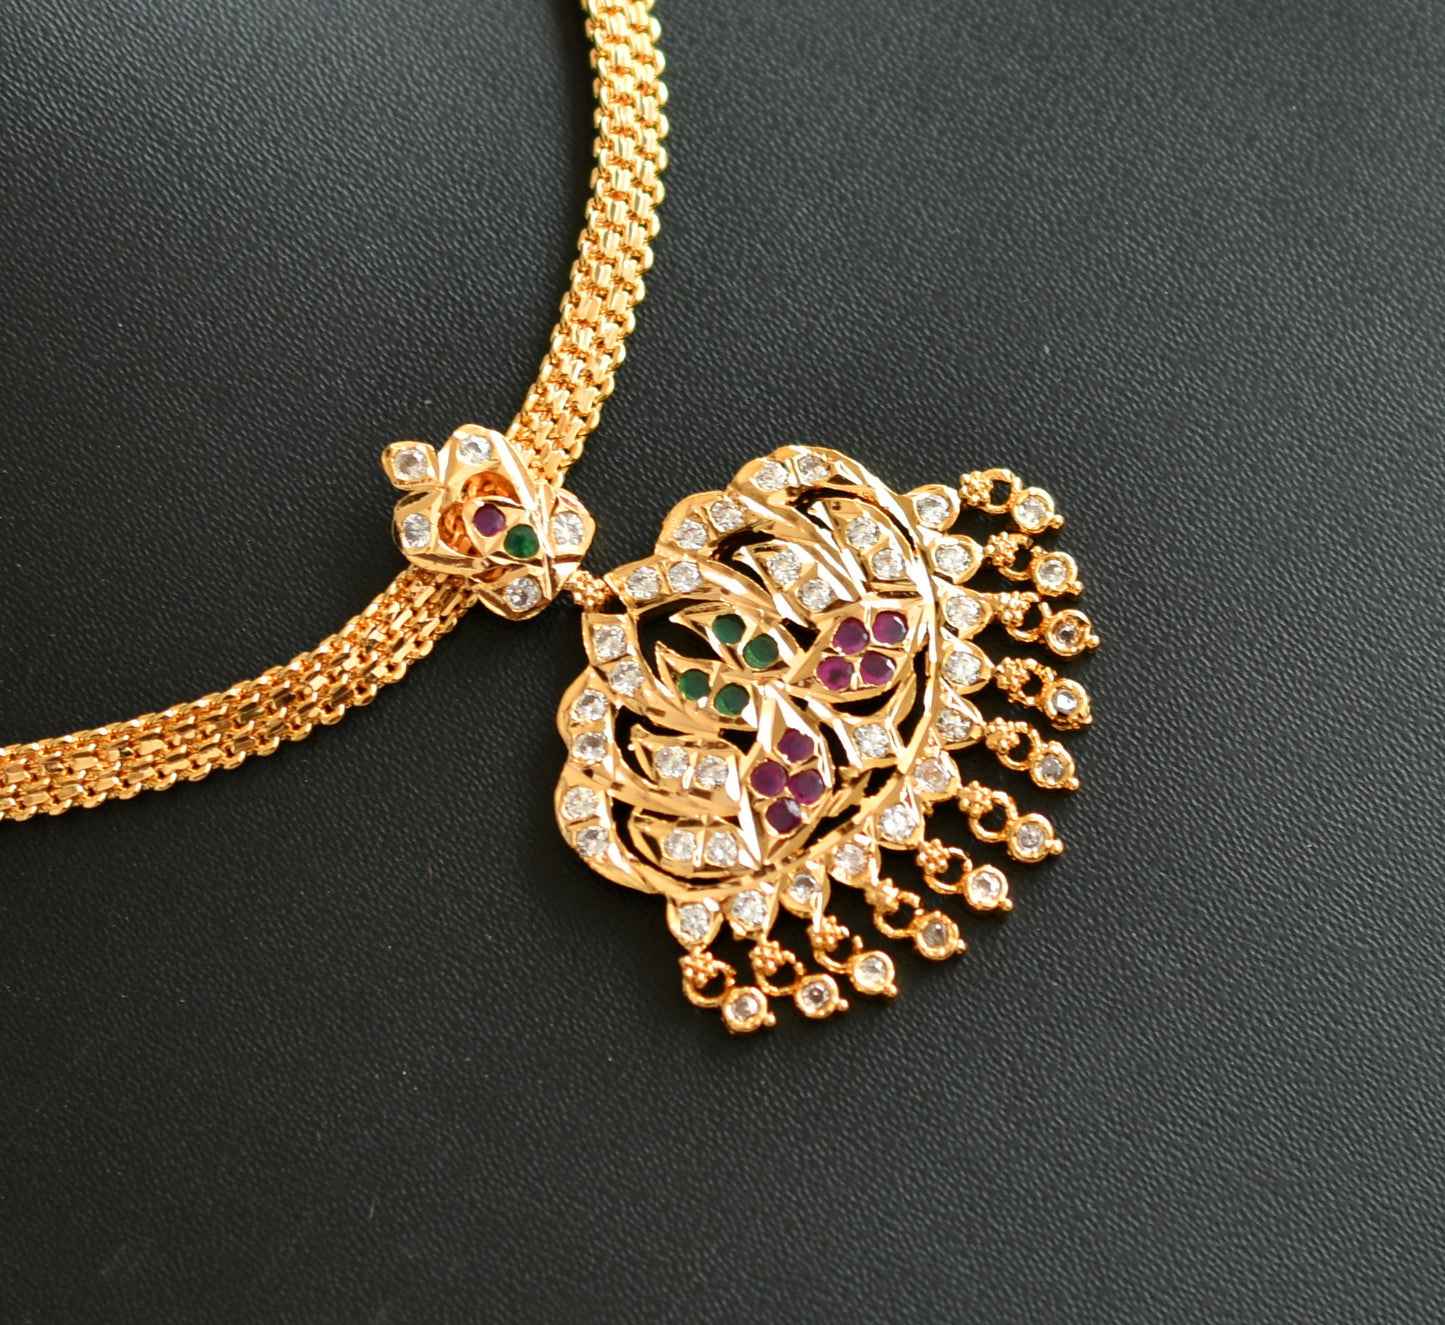 Gold tone ad pink-green-white stone south Indian style attigai/Necklace dj-39439